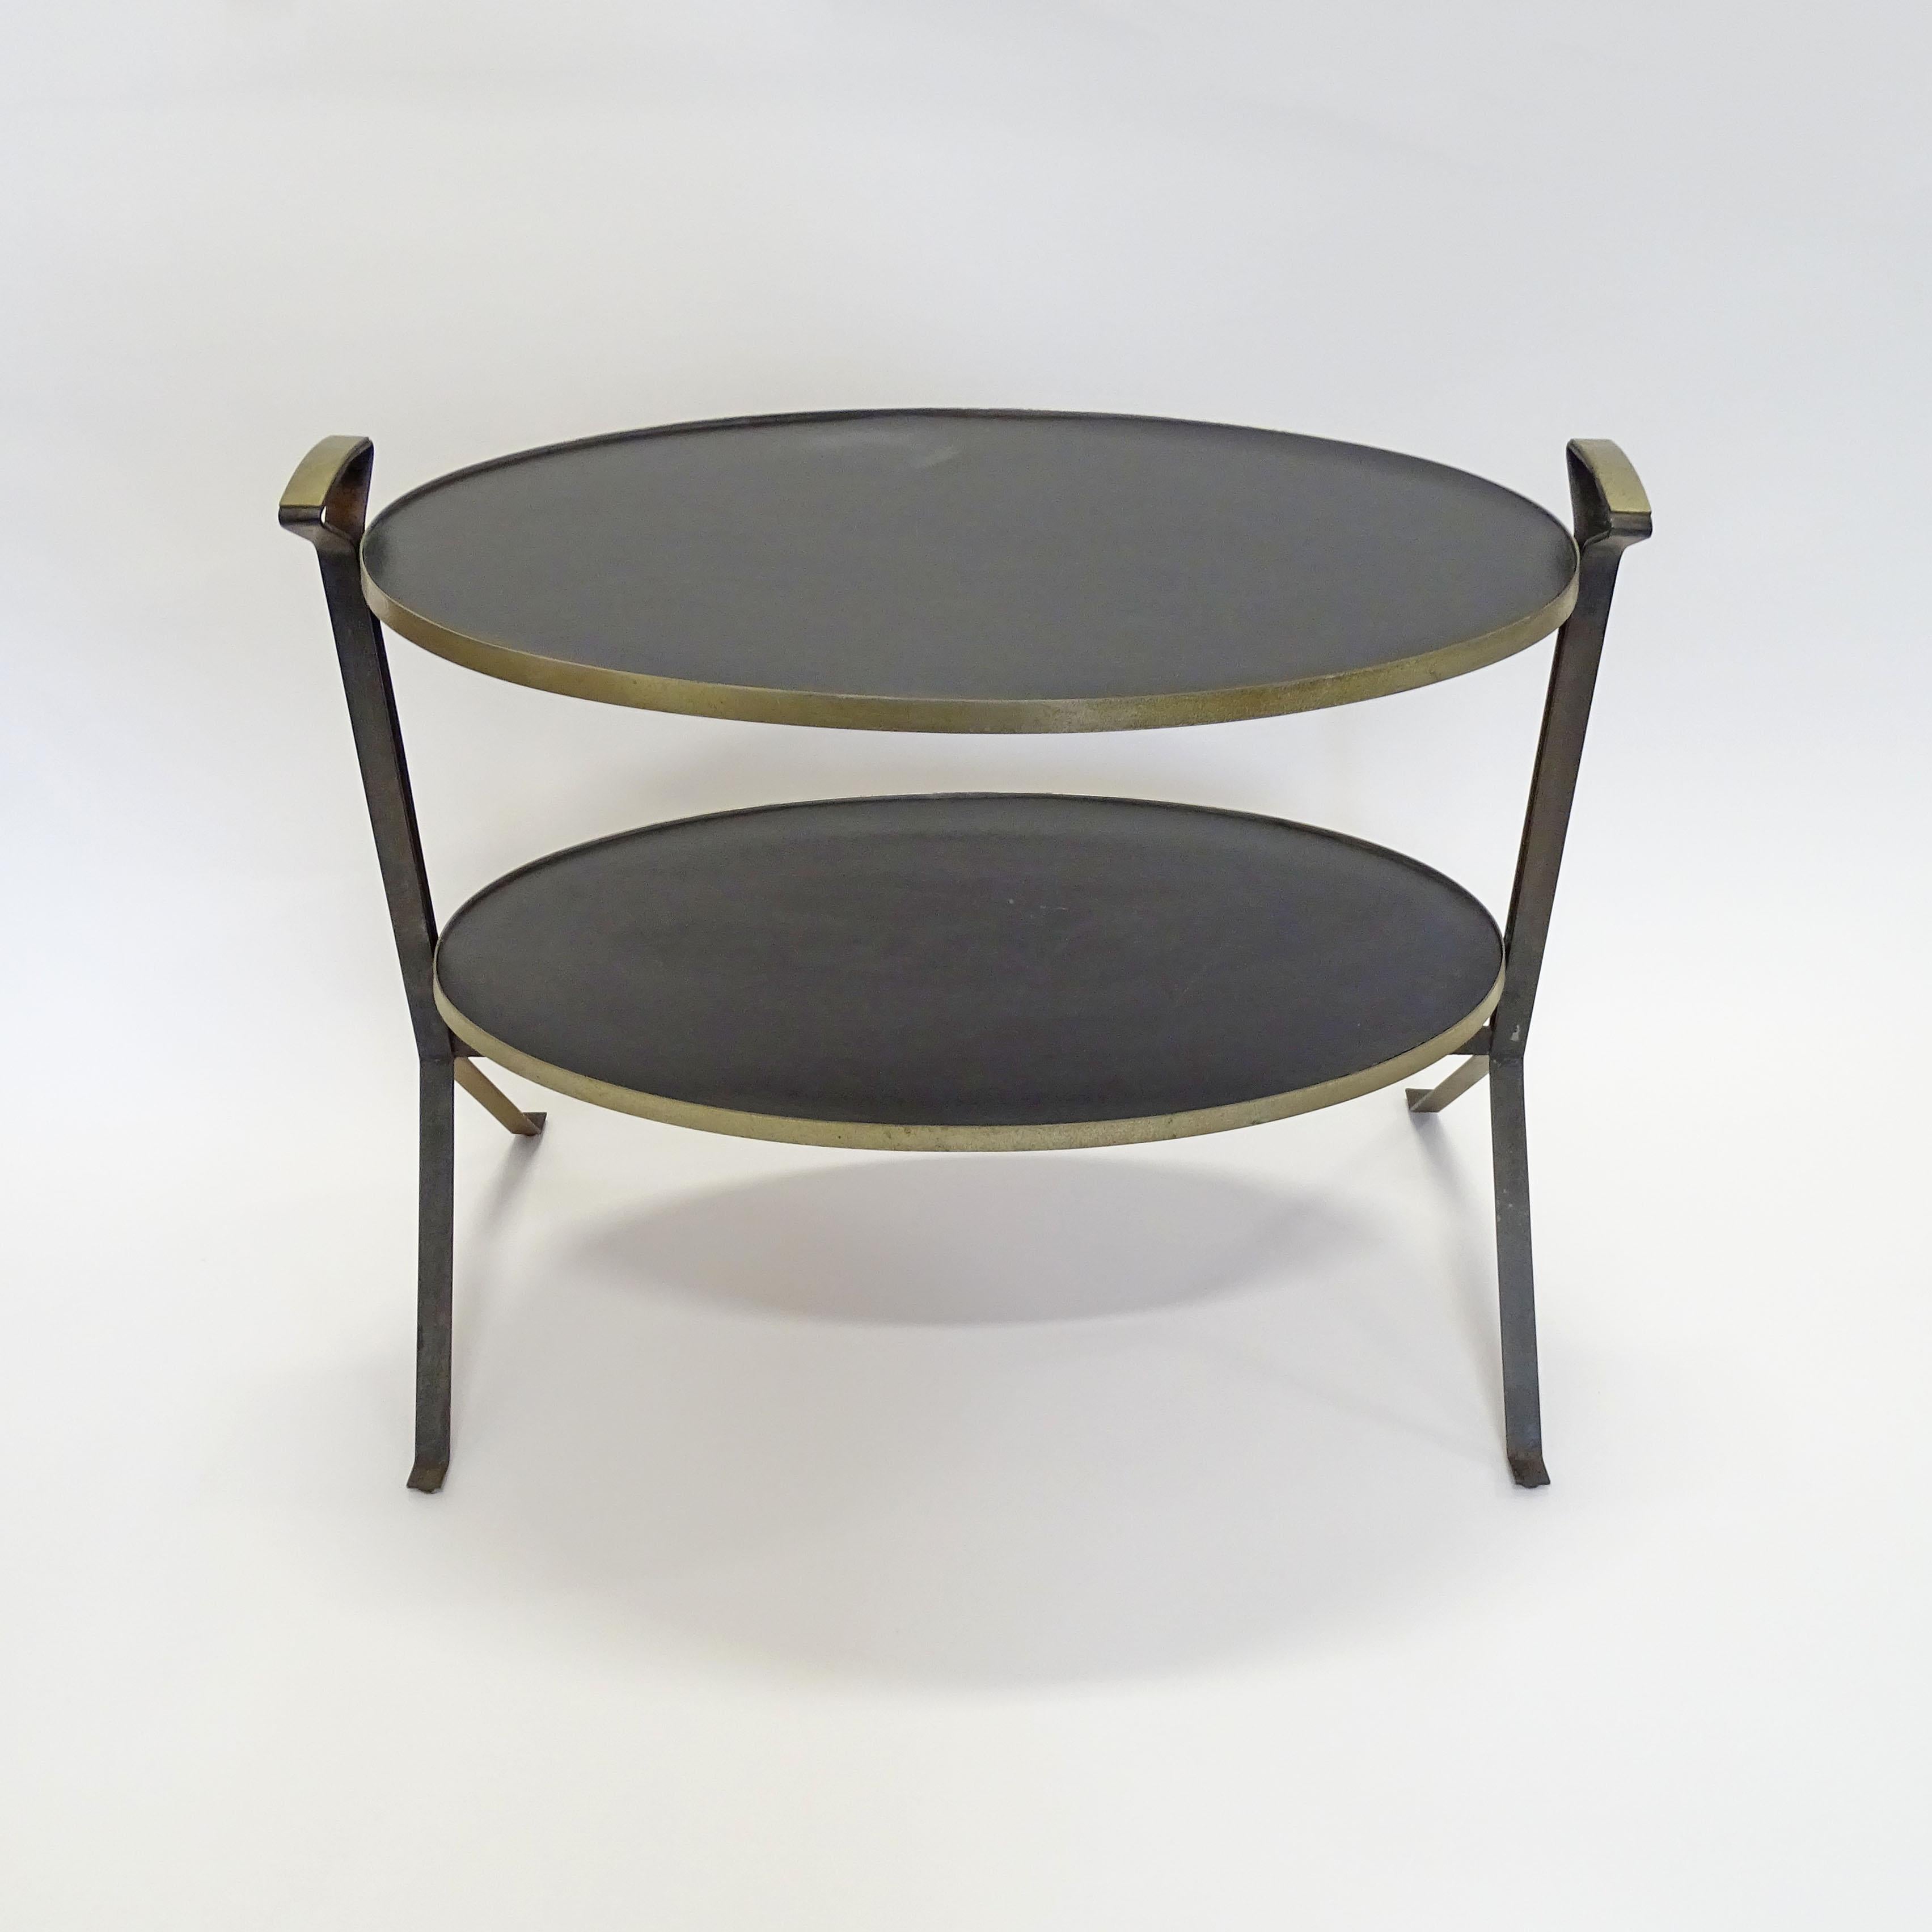 Architectural oval two tier serving table with handles, Italy, 1950s.